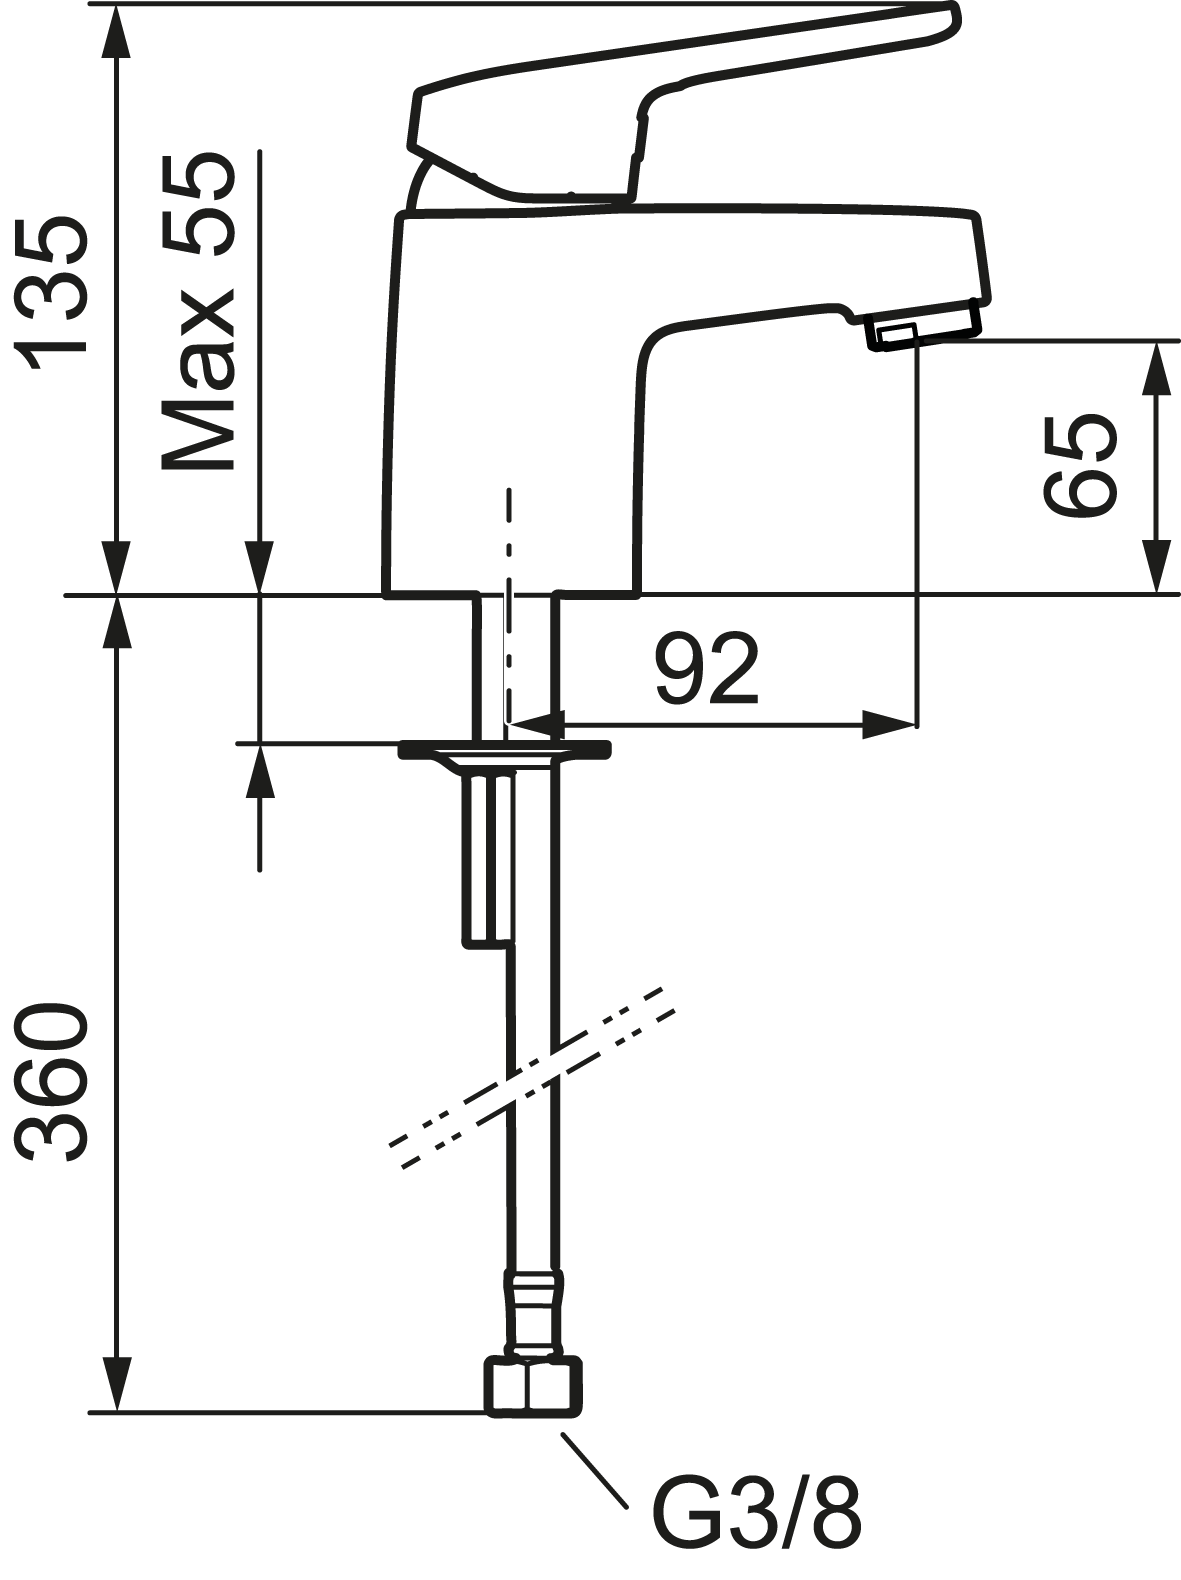 K8352-0010.png